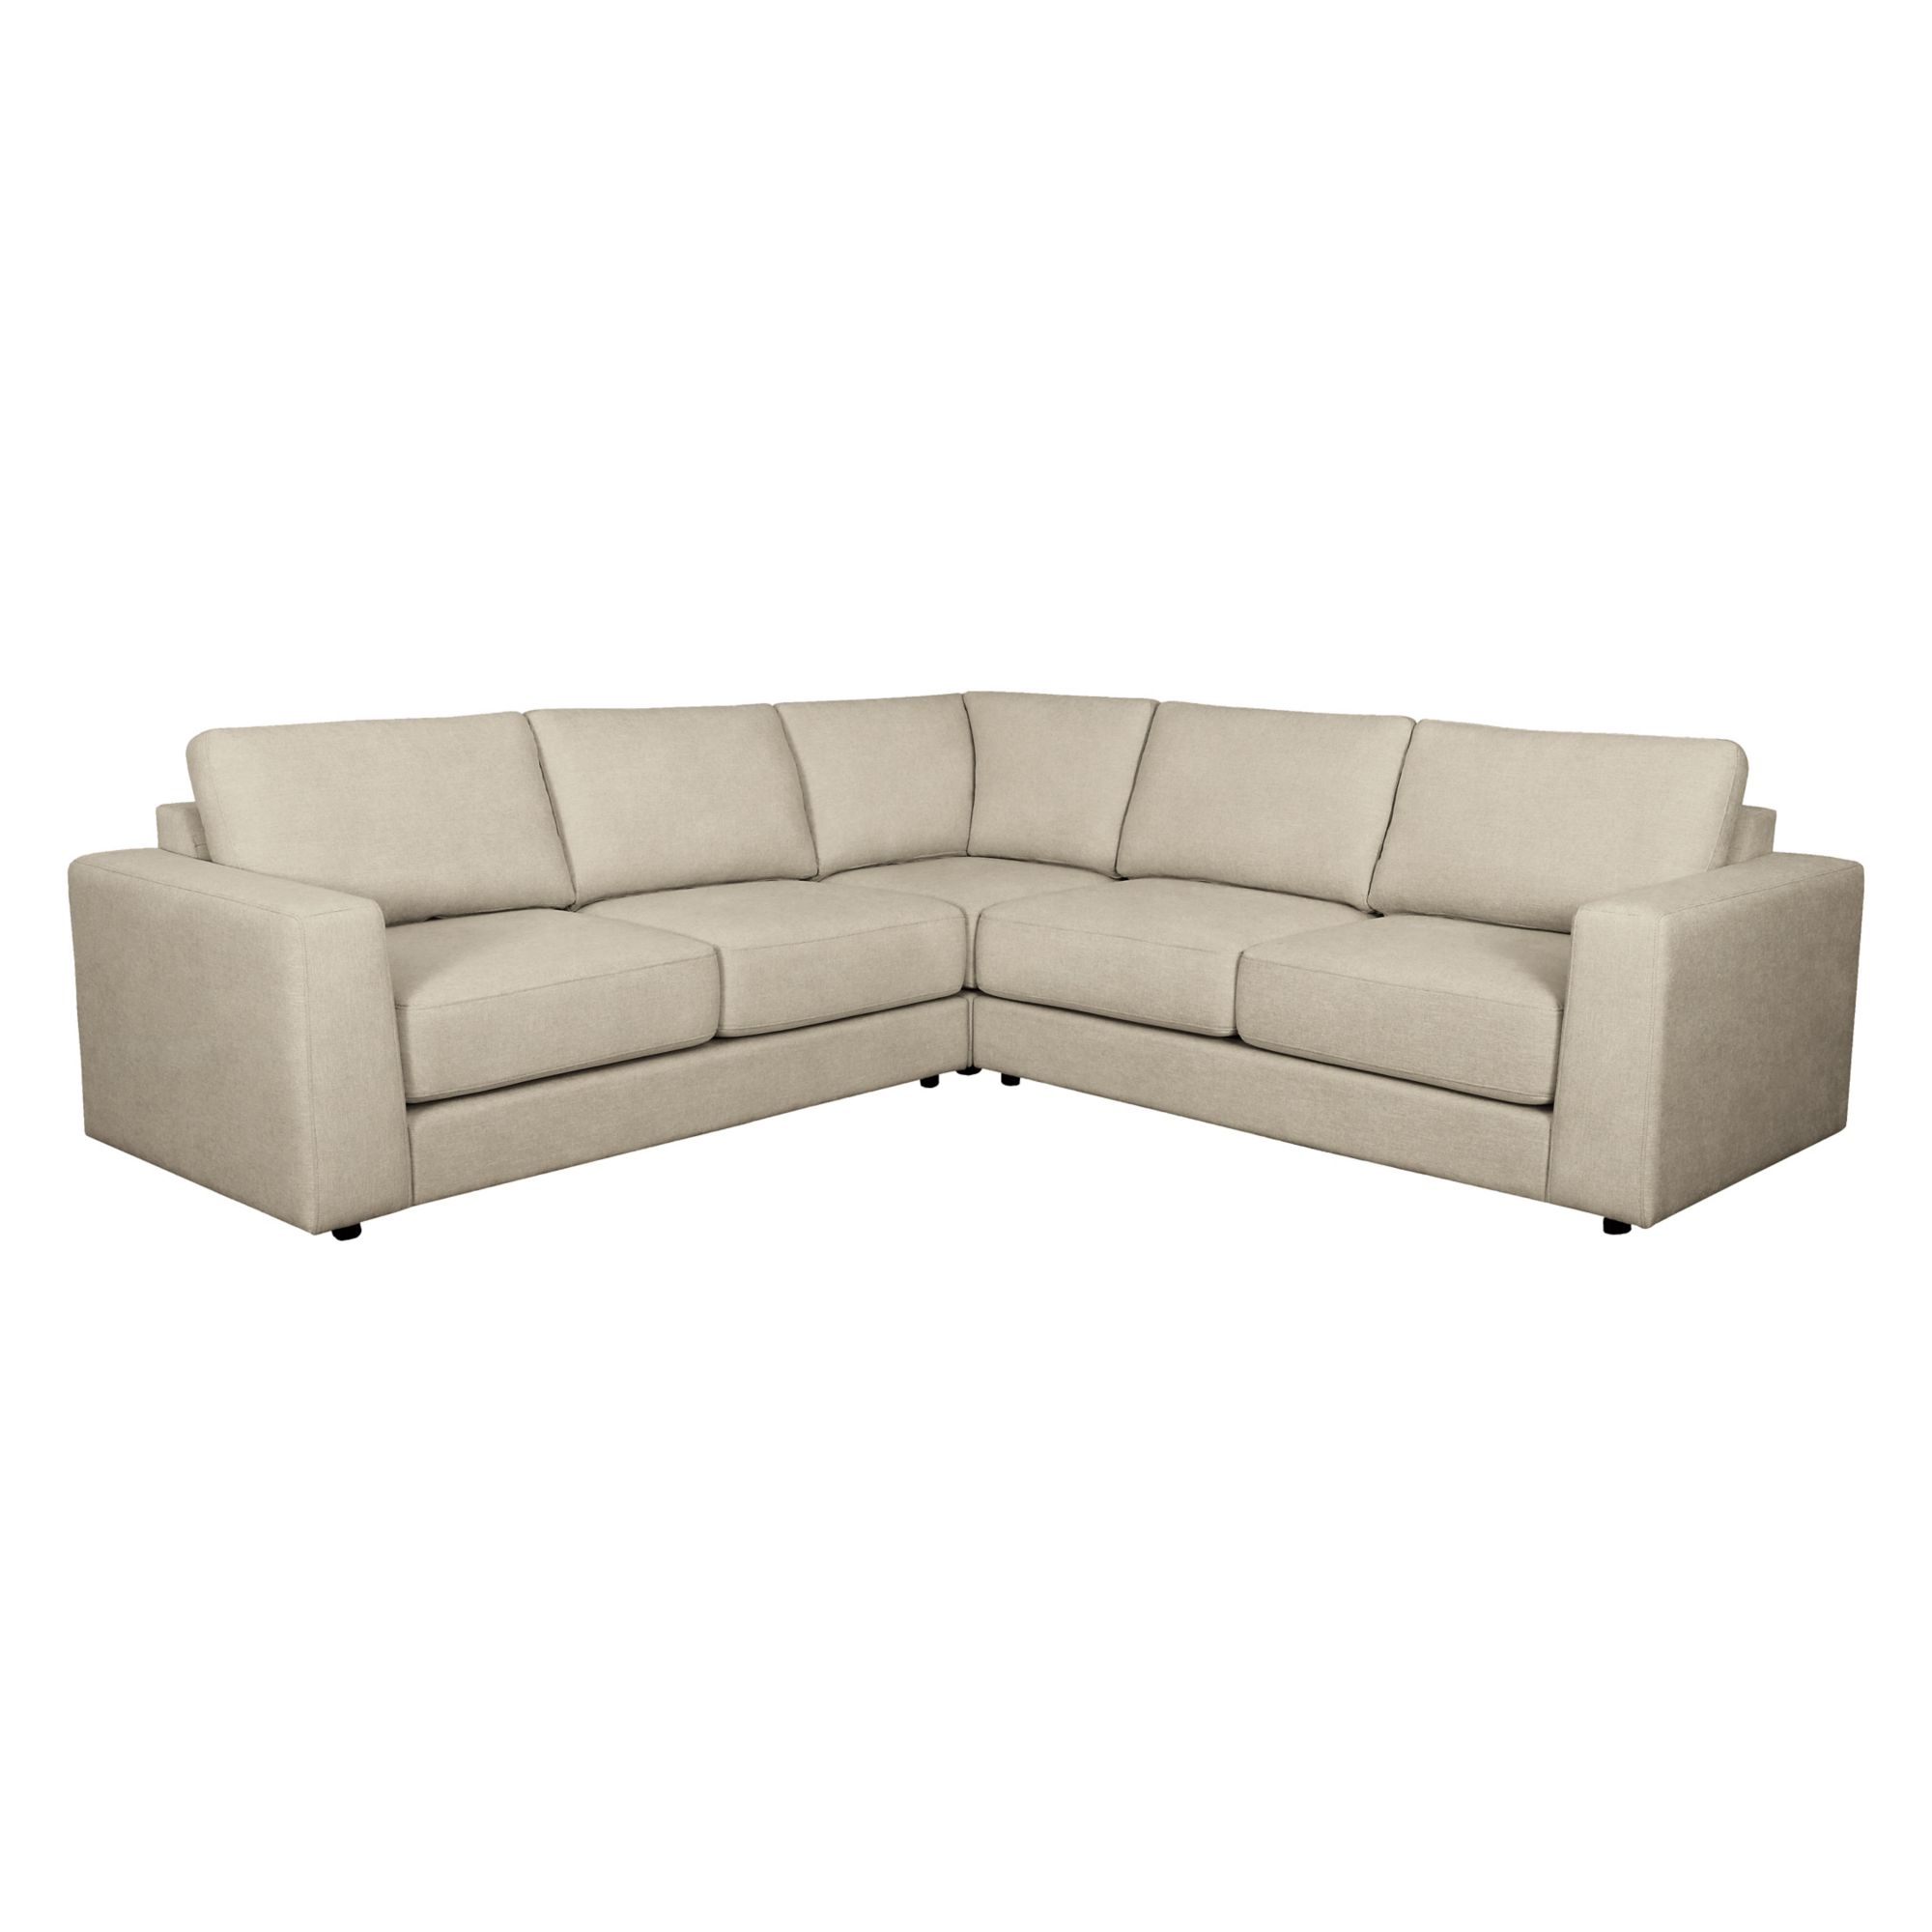 Abbyson Living Avery 3-Pc. Fabric Sectional - Sand | BJ's Wholesale Club